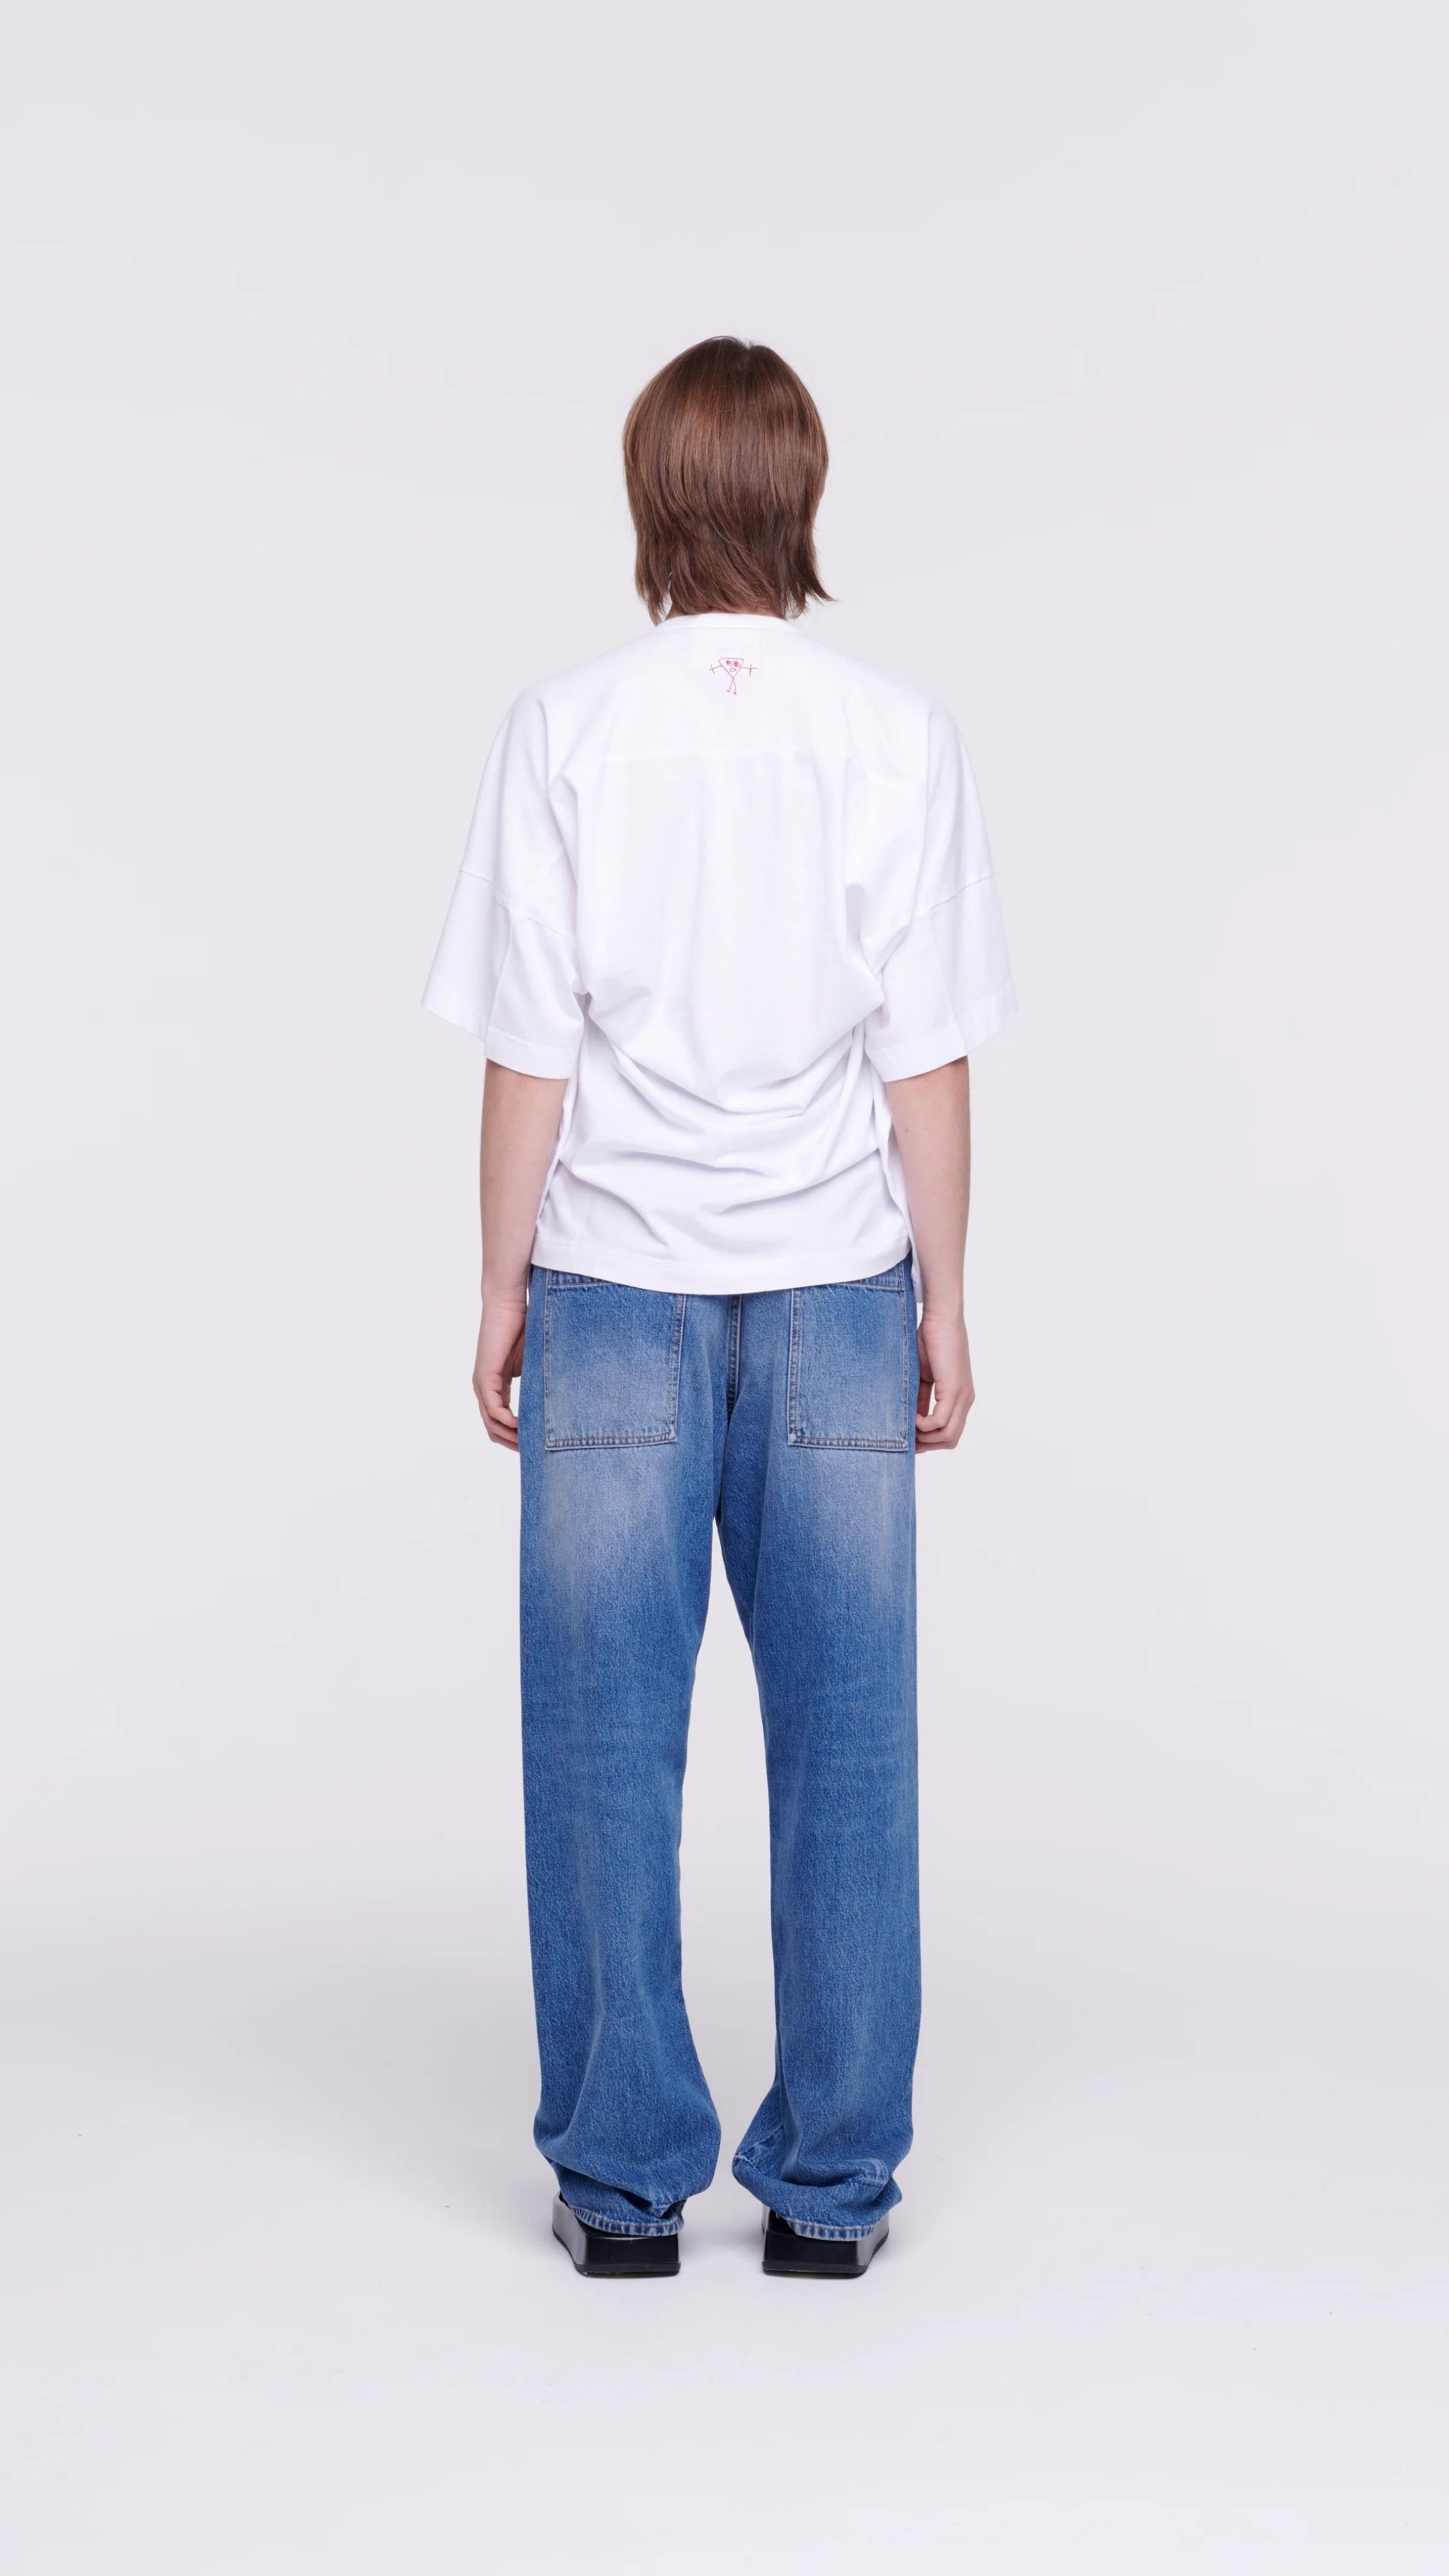 Plan C Draped Back White Cotton Tee 100% cotton, classic white tee with an updated modern draped back. The iconic Bianca patch in bold red adds a discreet accent at the back neckline. Shown on model from the back